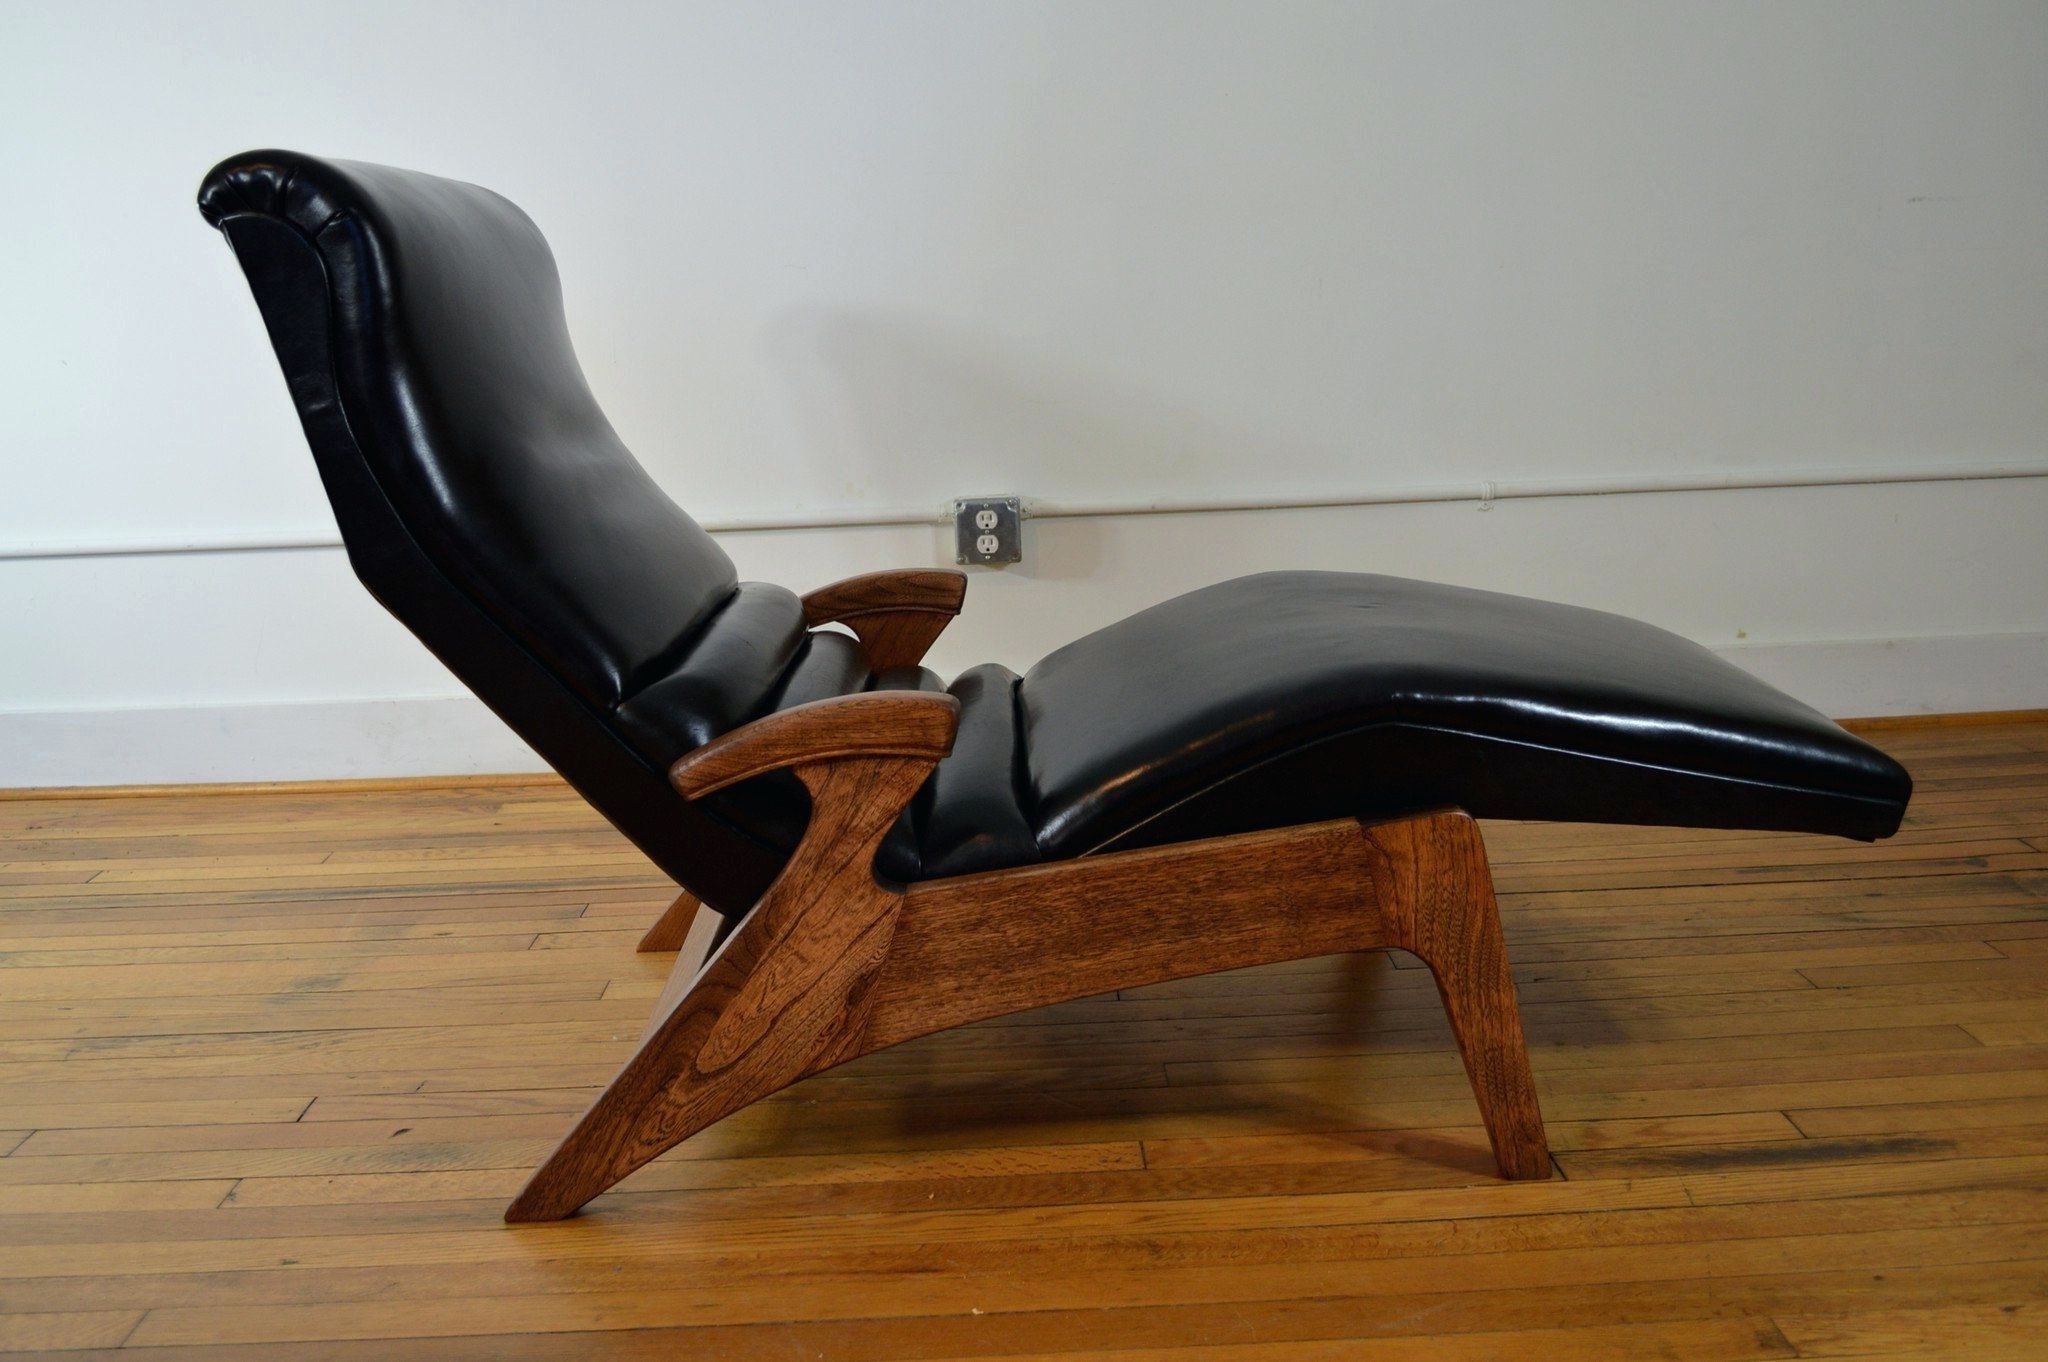 Mid Century Modern Chaise Lounge Chairs • Lounge Chairs Ideas With Regard To Most Recently Released Mid Century Modern Chaise Lounges (View 13 of 15)